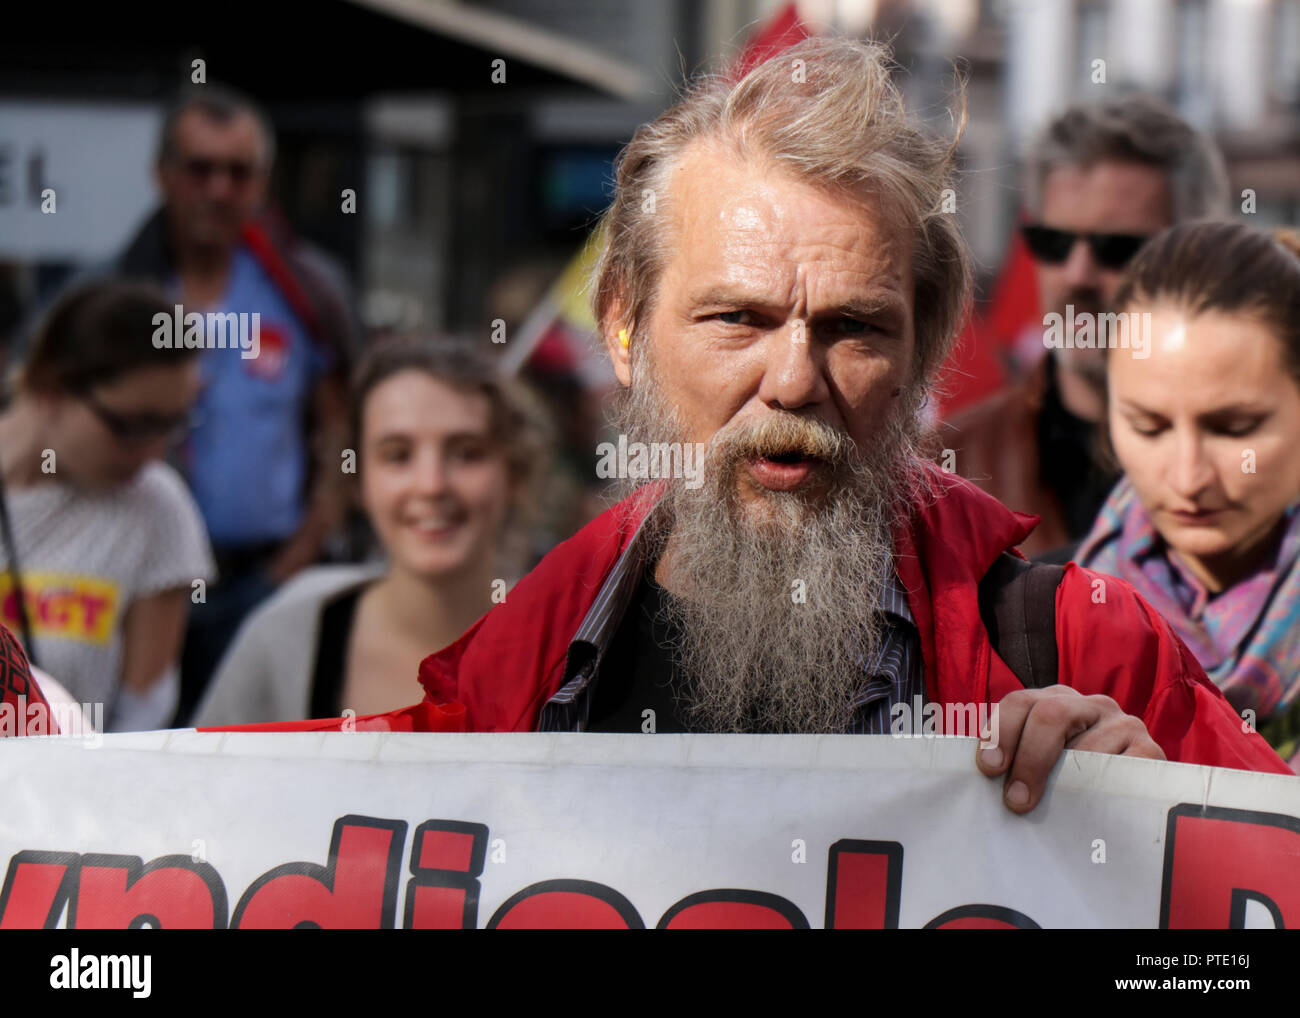 An elderly man seen holding a banner during the protest. People demonstrate during a one-day nationwide strike over French President Emmanuel Macron's policies in Strasbourg, eastern France. Stock Photo